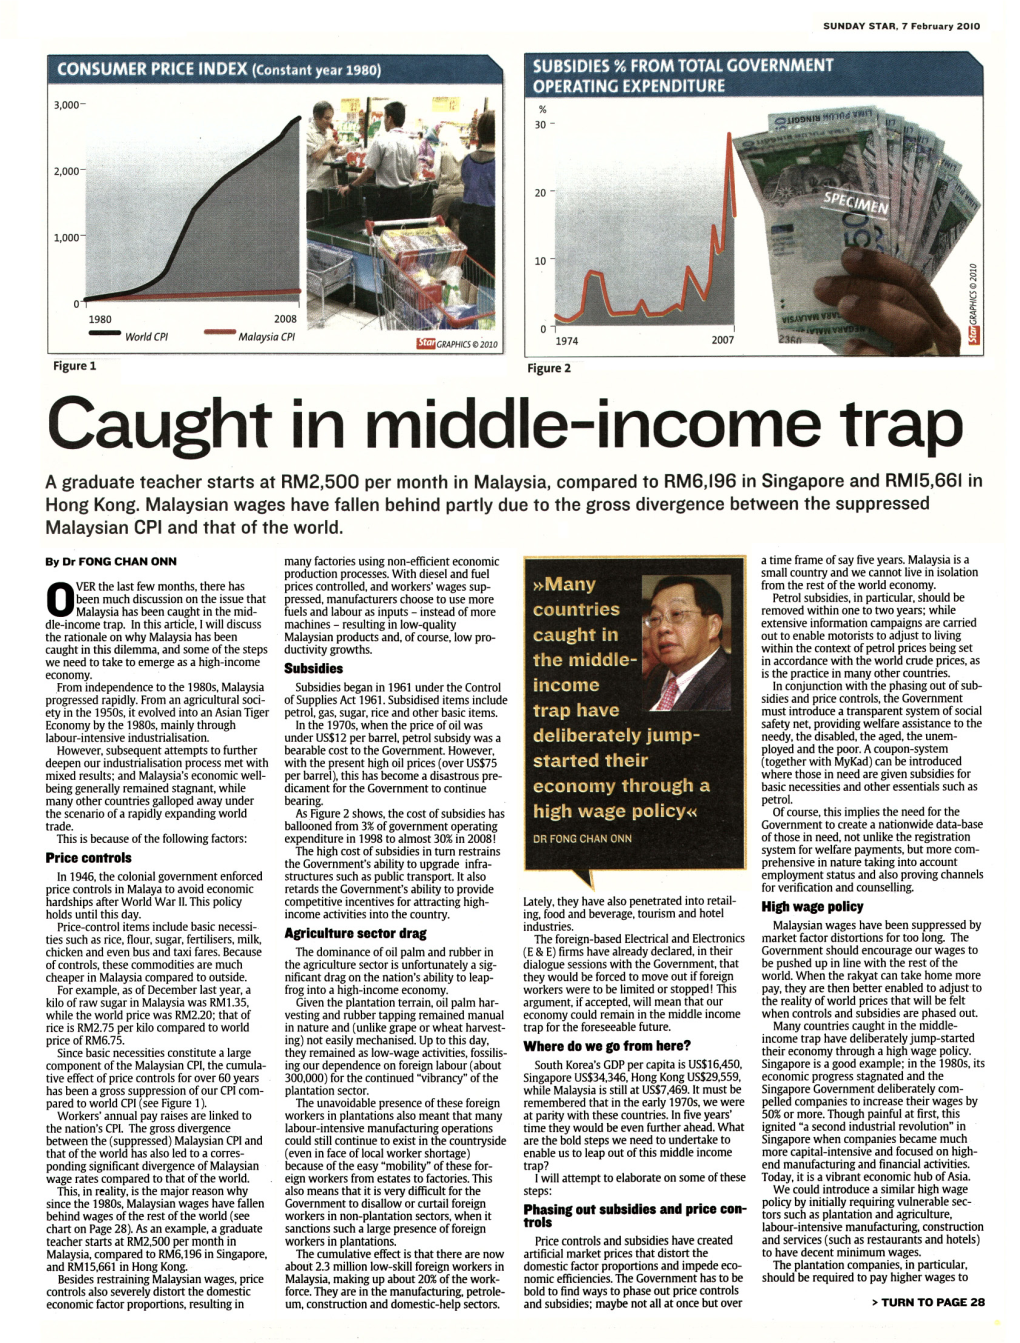 Caught in Middle-Income Trap